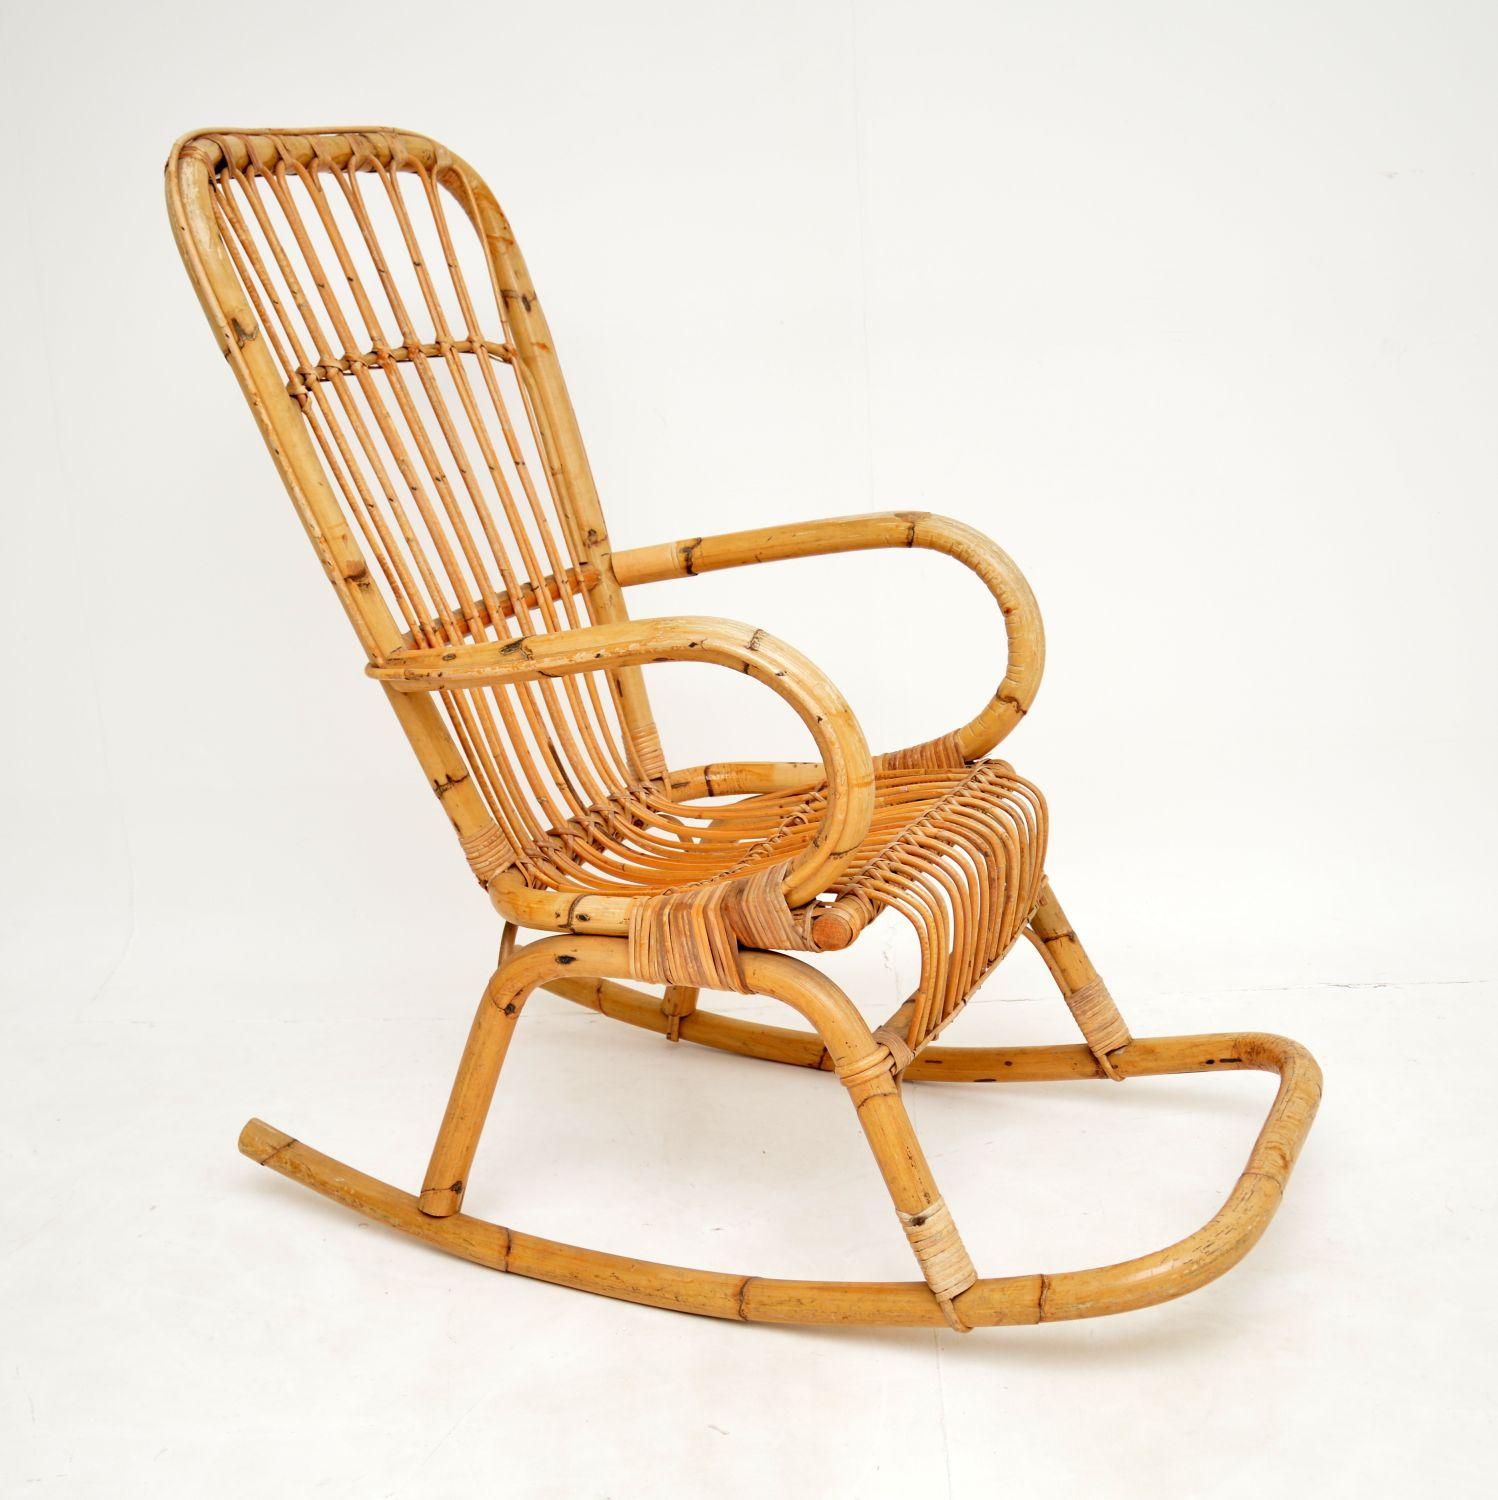 A stylish and very comfortable vintage bamboo rocking chair with footrest. This was made in England, it dates from around the 1970’s.

It is very well made, sturdy and sound with a lightweight frame characteristic of bamboo. It is extremely